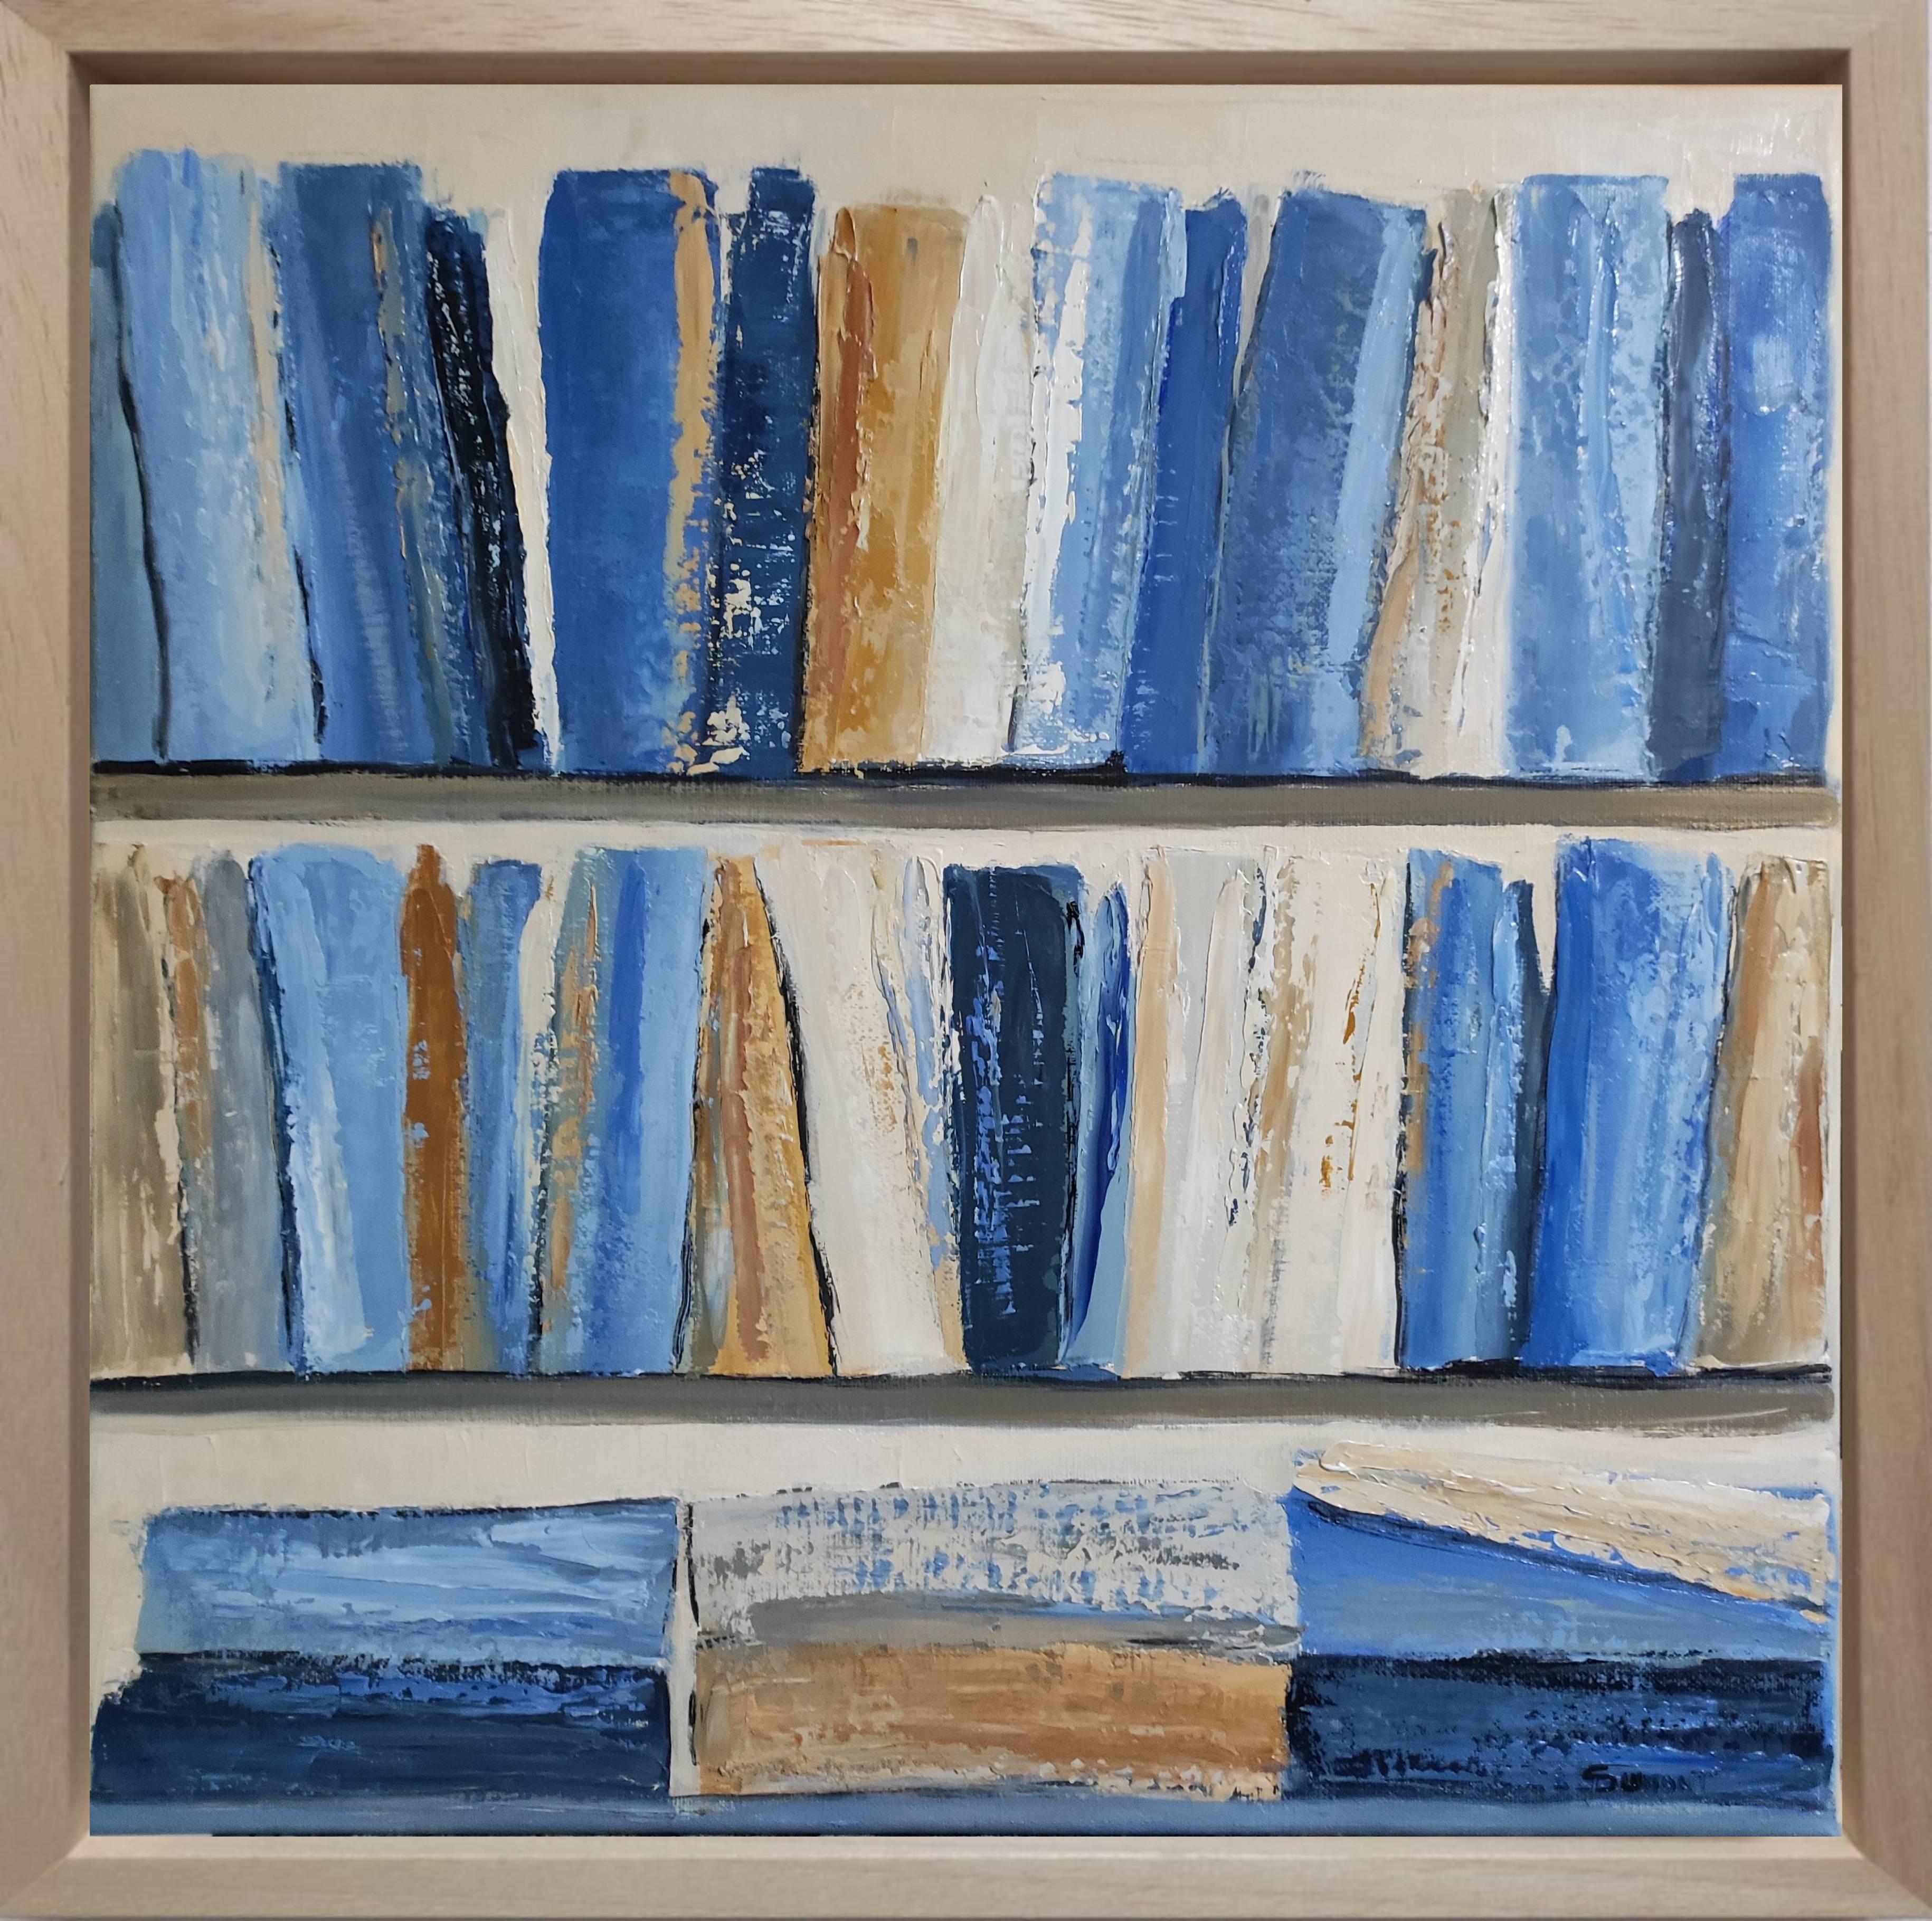 SOPHIE DUMONT Figurative Painting - les recueils, blue abstract library, oil on canvas, textured, minimalism, modern